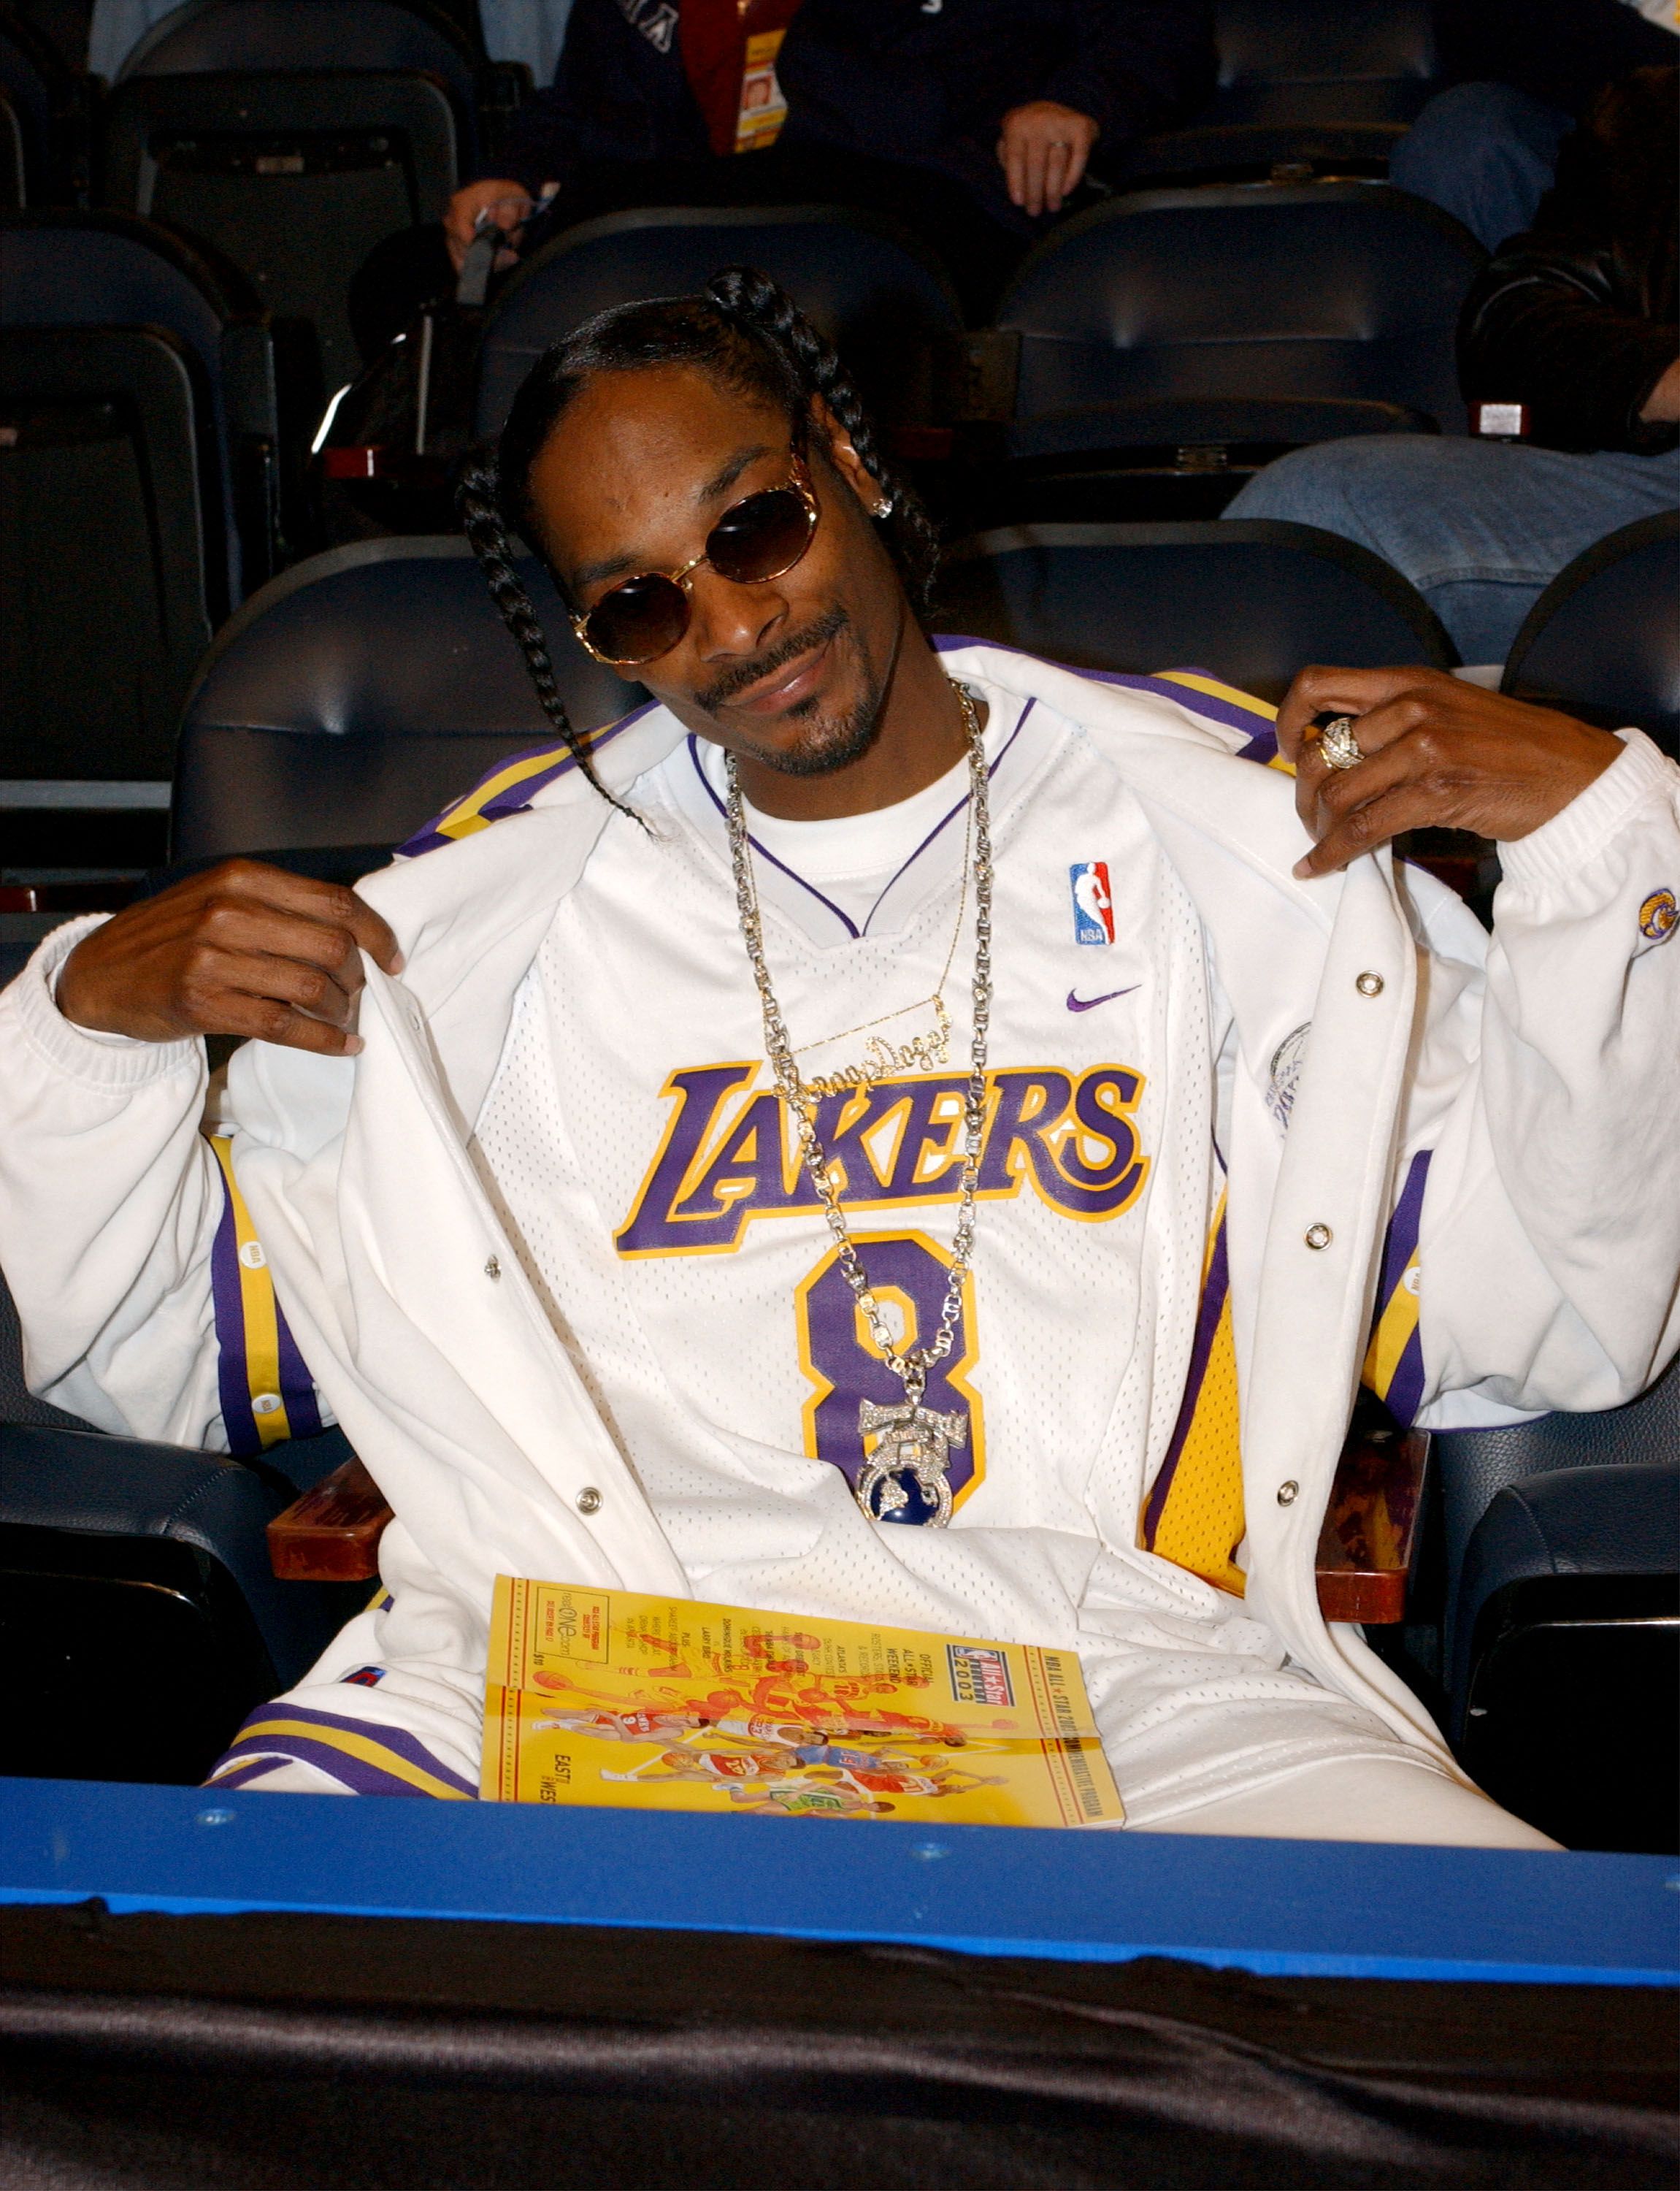 Snoop Dogg at the 2003 NBA All-Star game at the Phillips Arena on February 9, 2003. | Photo: Getty Images